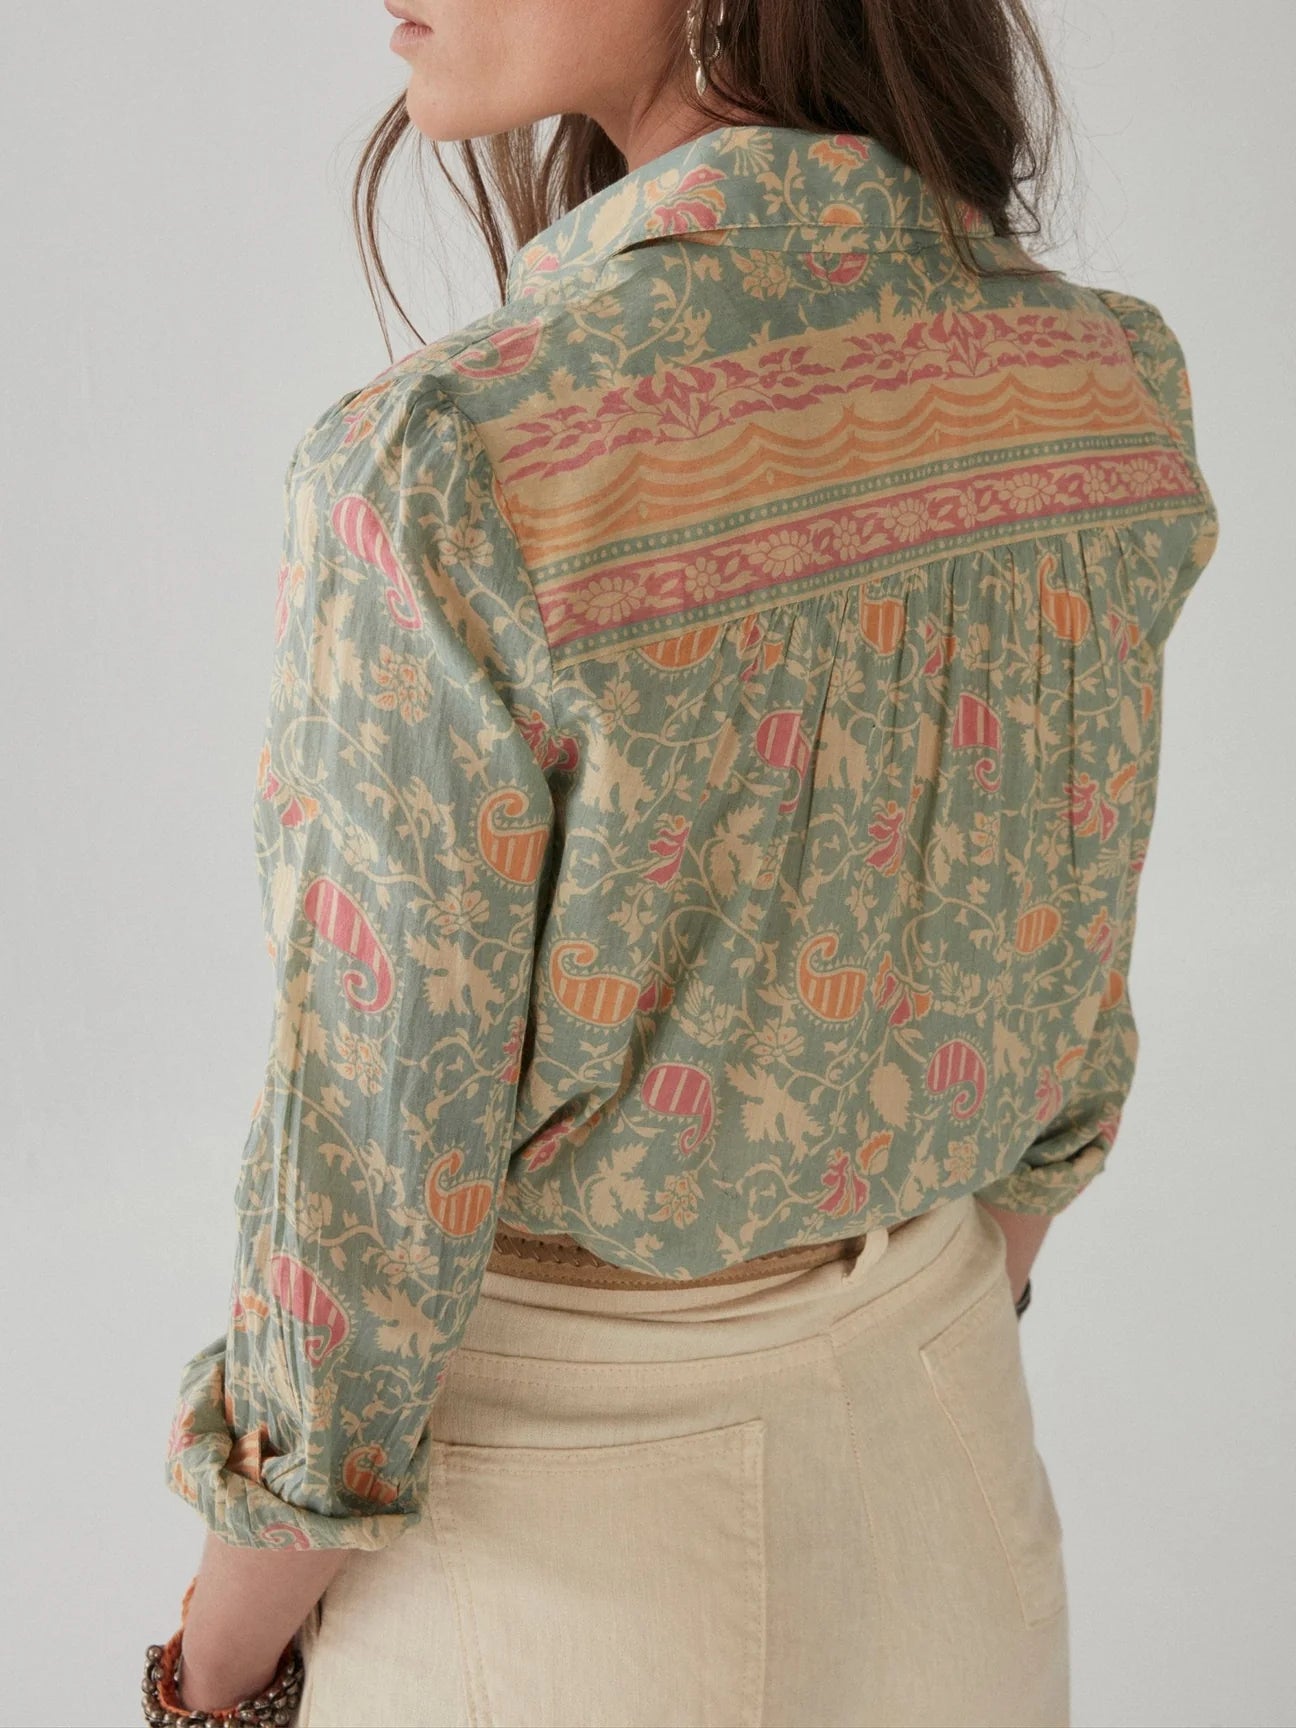 Back view of Maison Hotel's Bruna Button Up Blouse in the color Cotton Candy